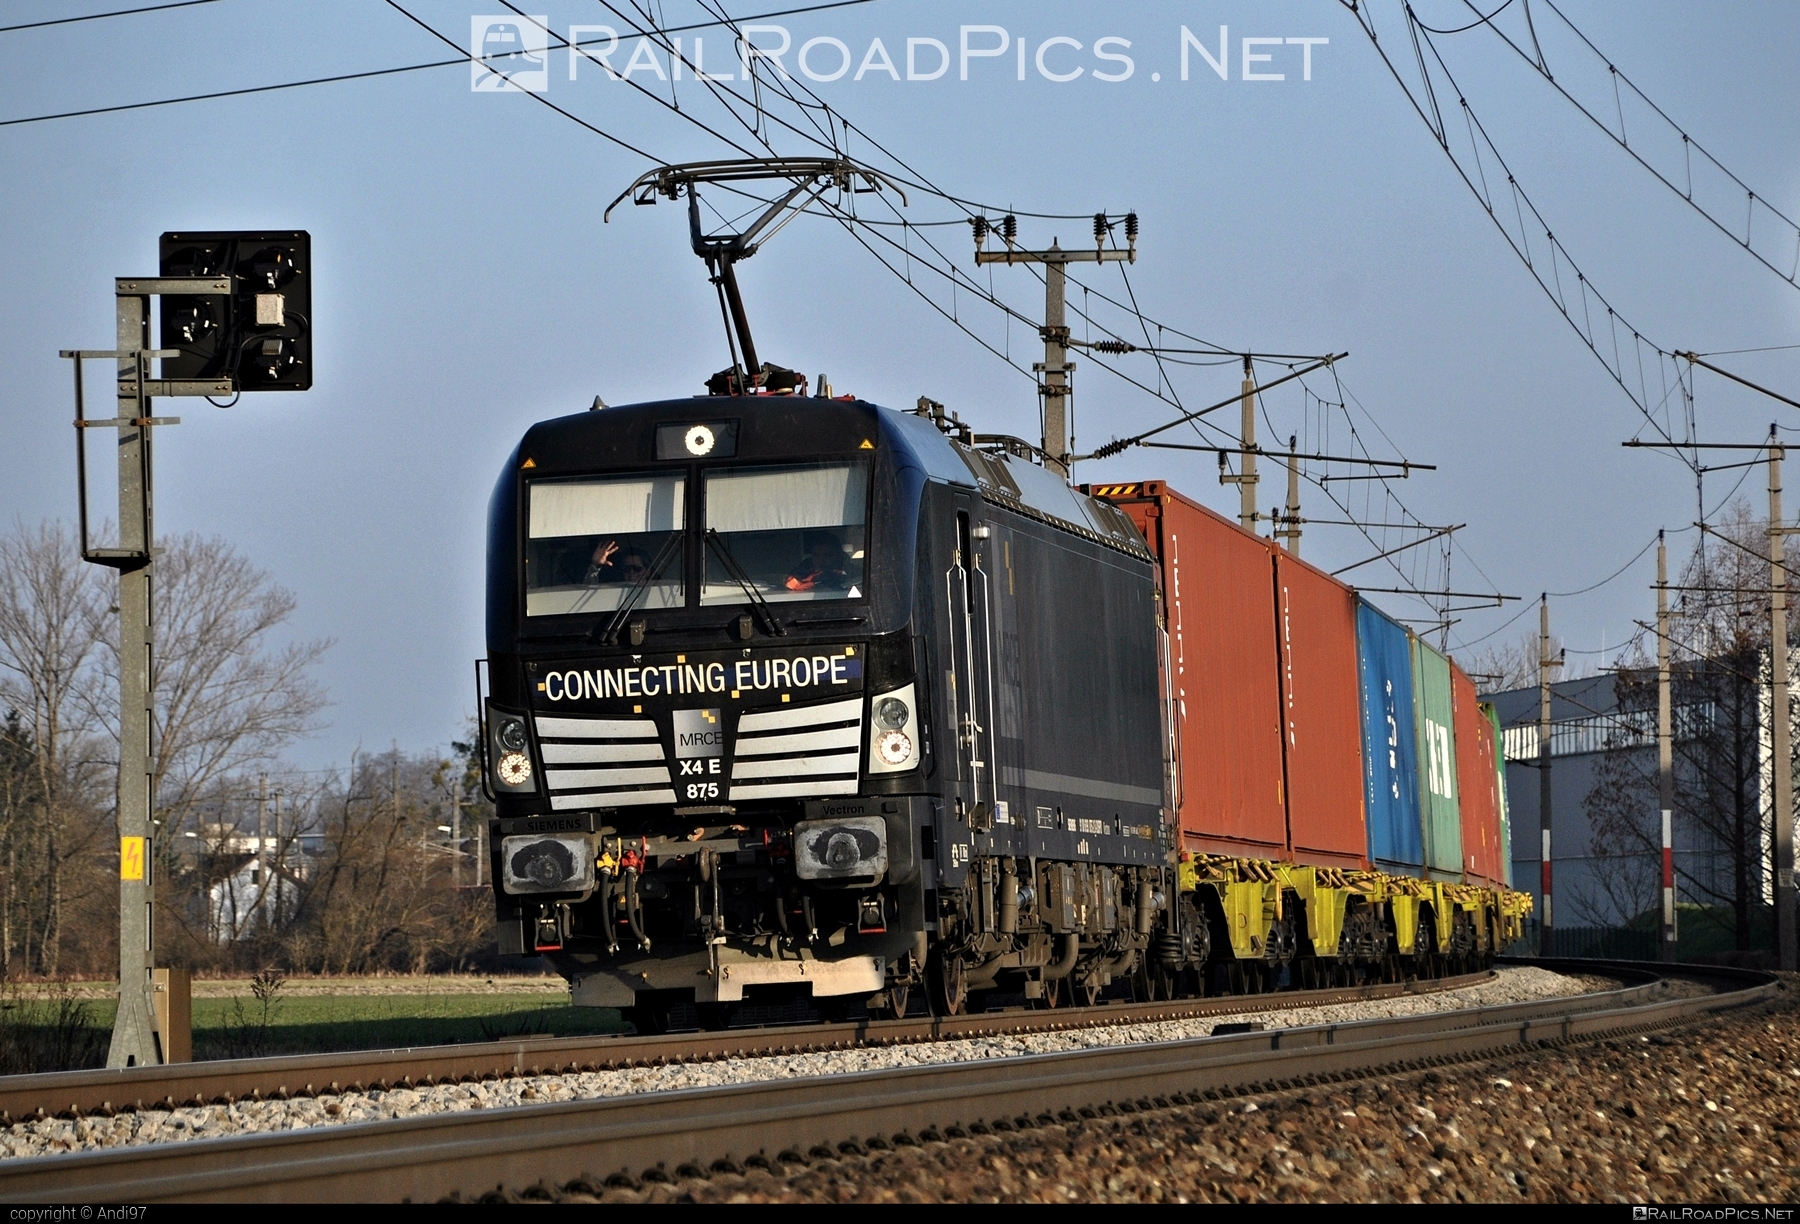 Siemens Vectron AC - 193 875 operated by Wiener Lokalbahnen Cargo GmbH #container #dispolok #flatwagon #greetings #mitsuirailcapitaleurope #mitsuirailcapitaleuropegmbh #mrce #siemens #siemensVectron #siemensVectronAC #vectron #vectronAC #wienerlokalbahnencargo #wienerlokalbahnencargogmbh #wlc